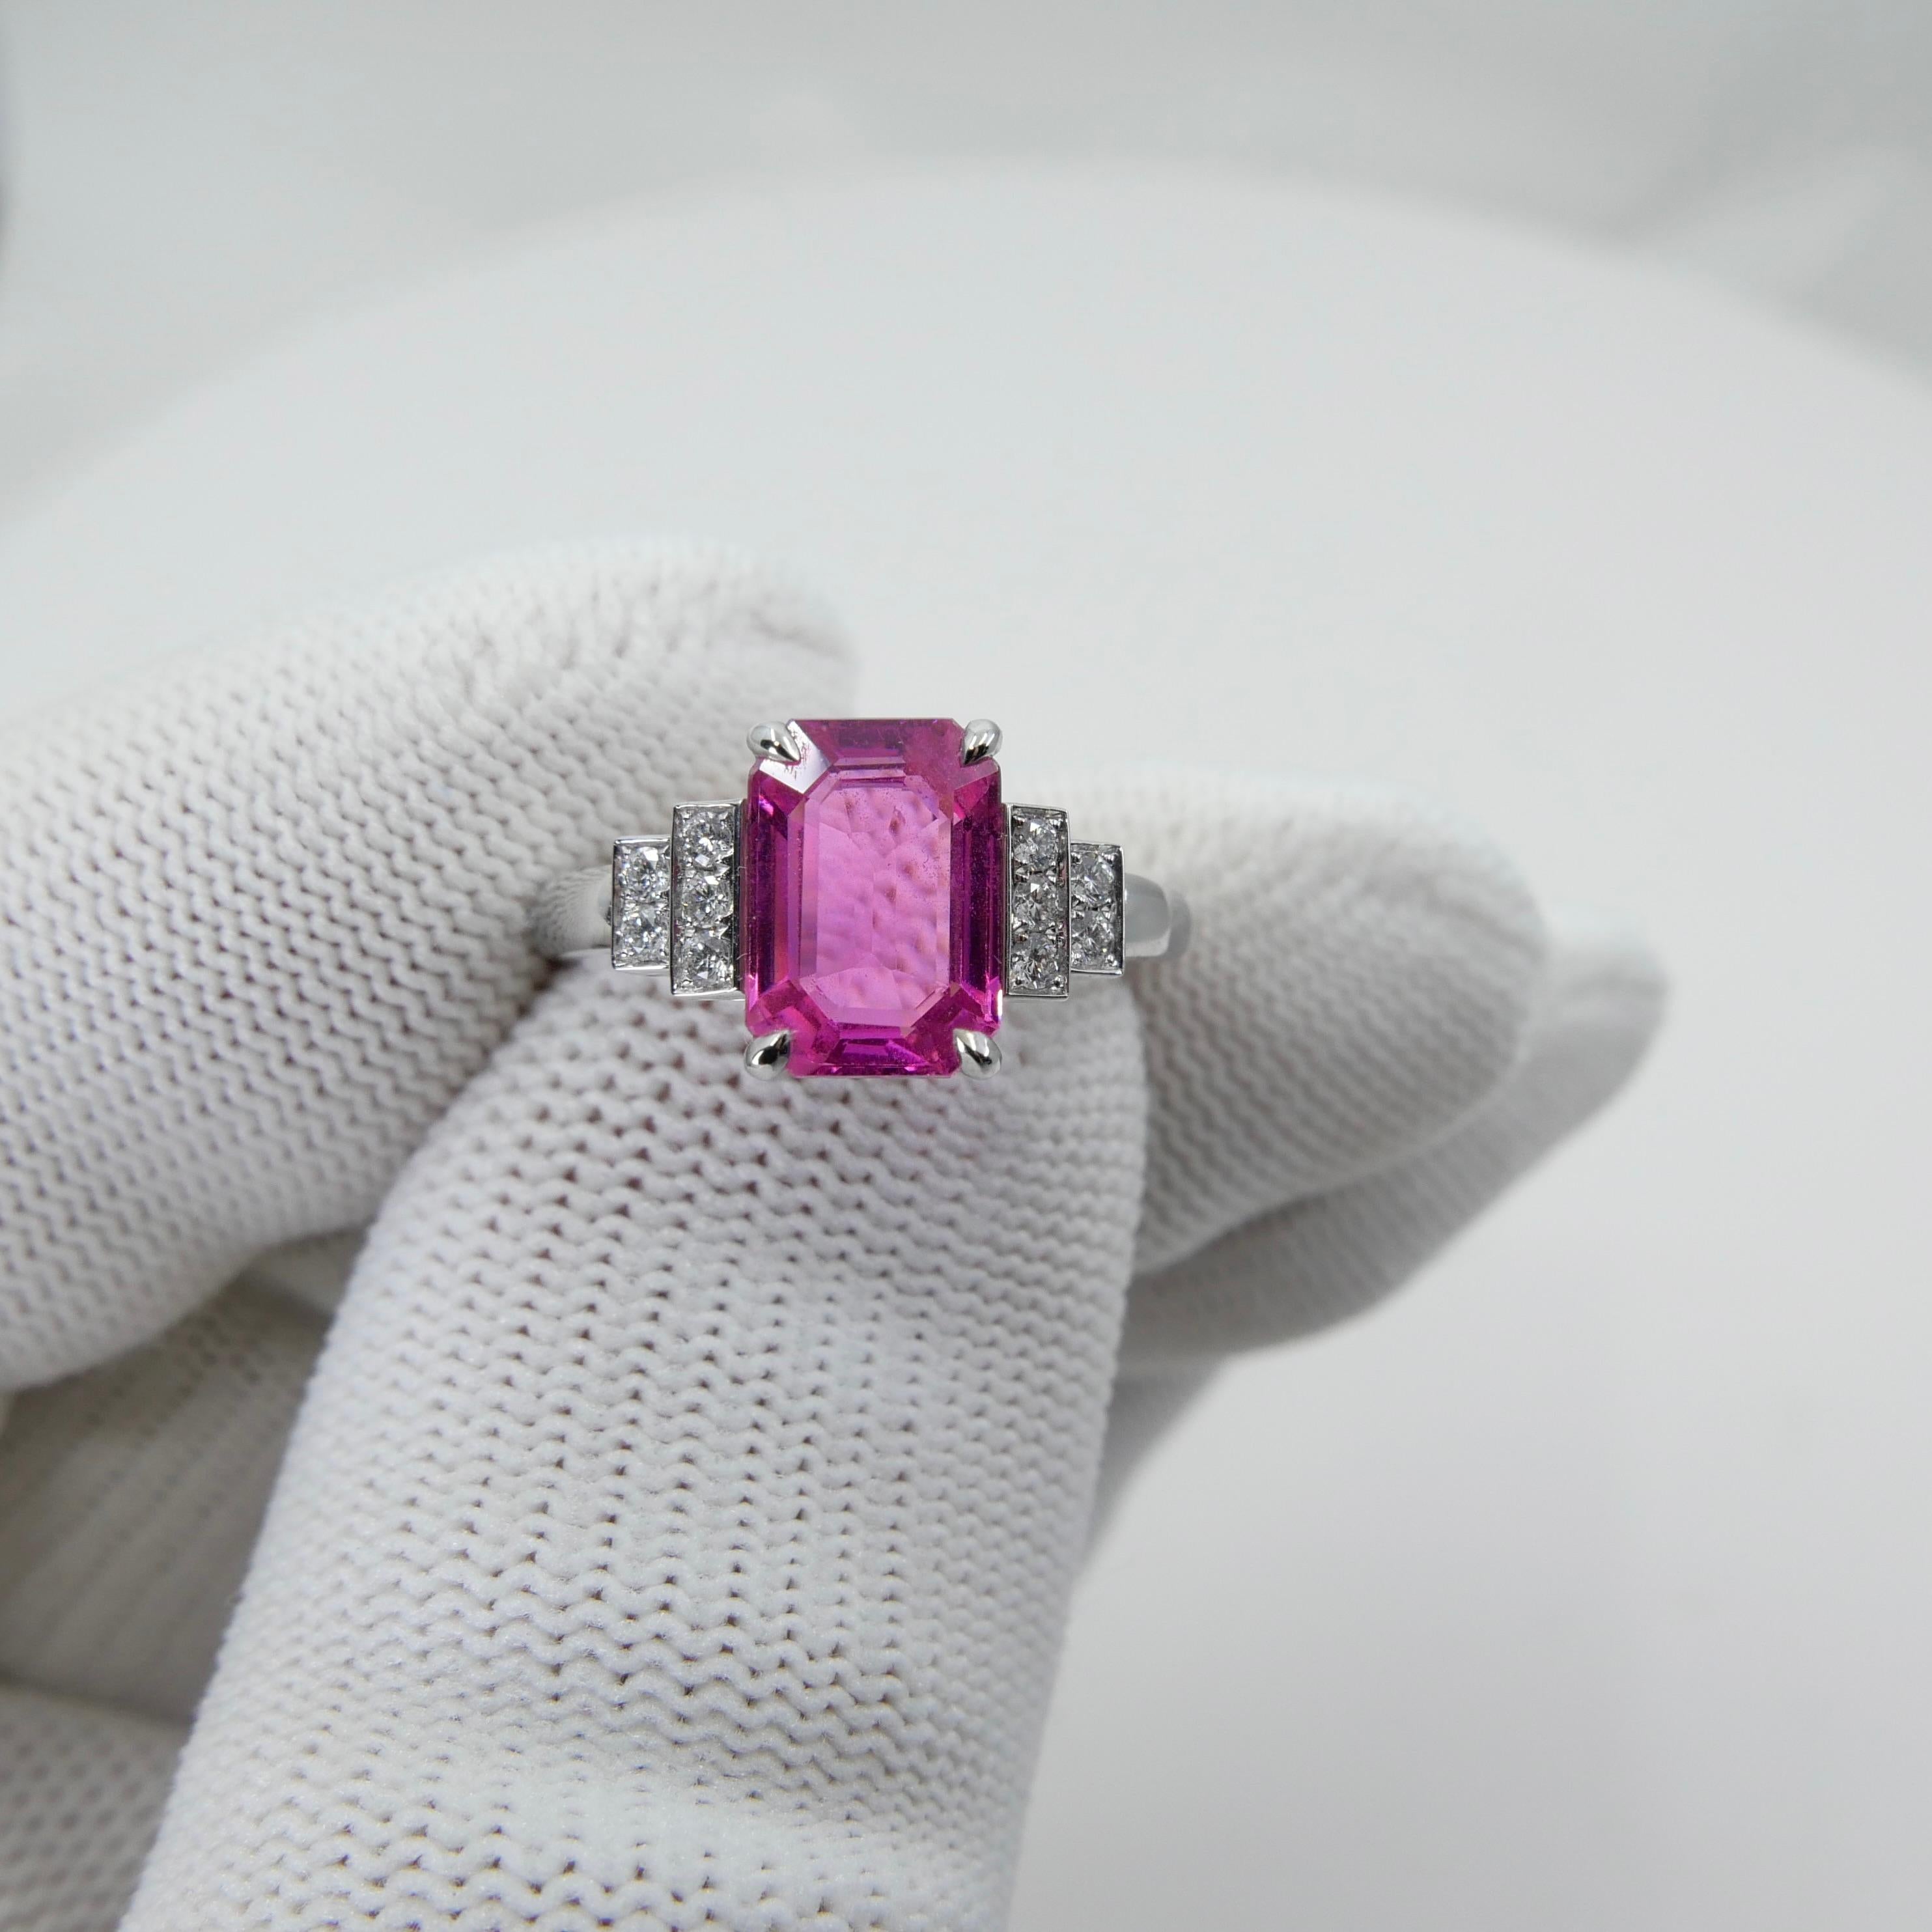 Please check out the HD video. The color of this sapphire is stunning! In words, we would describe the color of this sapphire neon vivid pink. It GLOWS! This 3.11 cts natural pink sapphire is certified by world recognized lab GRS to be from